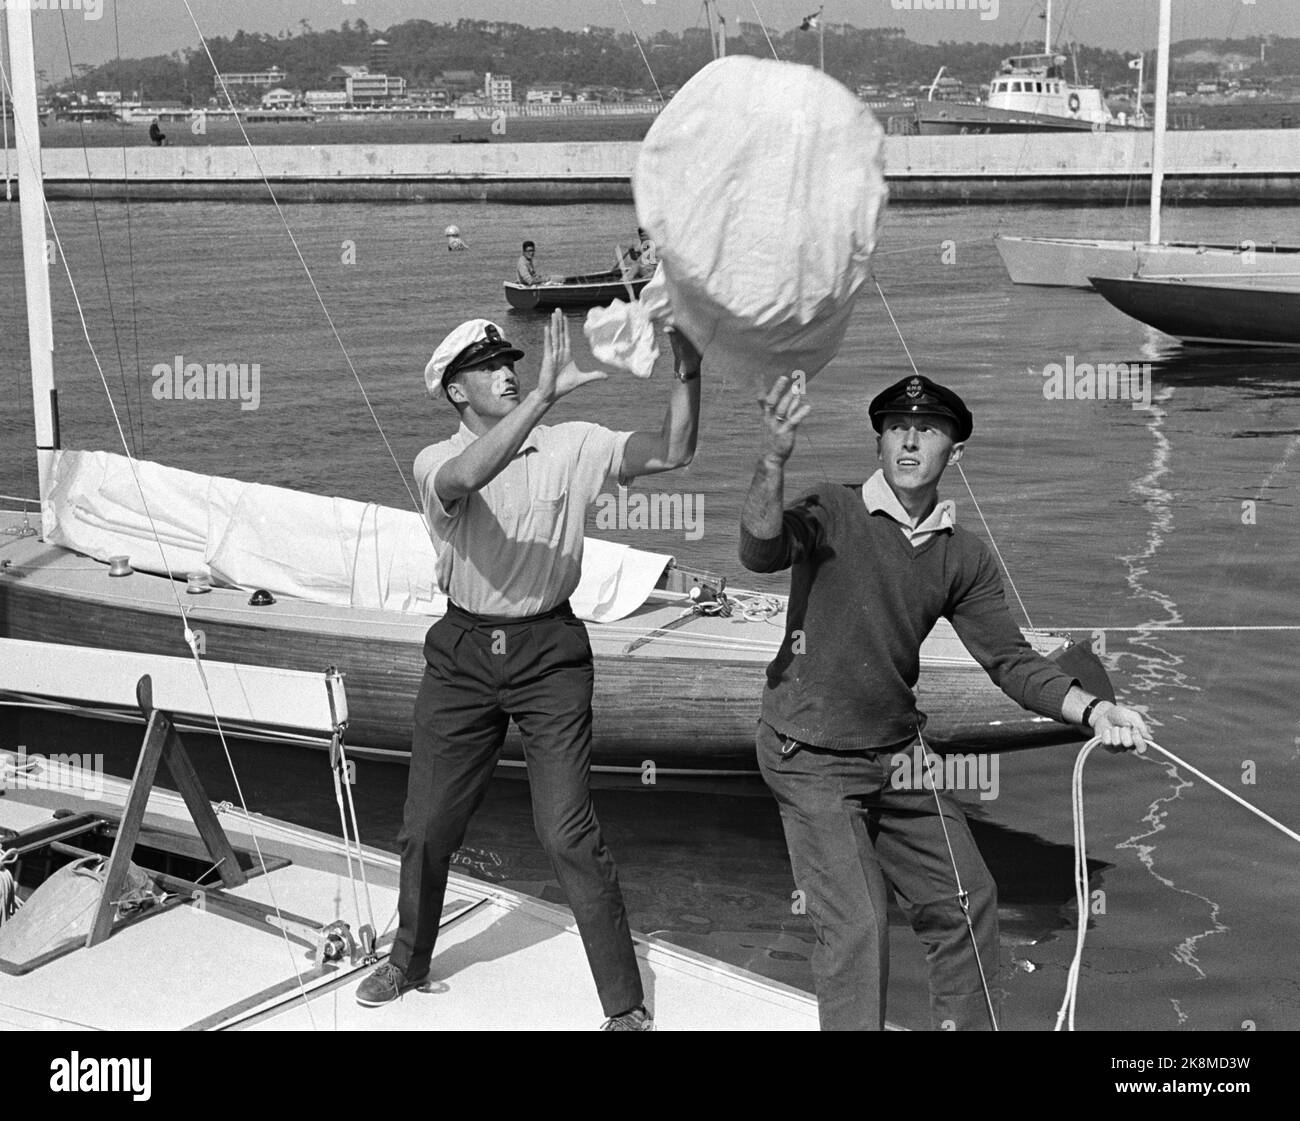 Tokyo, Japan 1964 Summer Olympics in Tokyo. Crown Prince Harald participates in the Norwegian Olympic team in sailing. T.H. Stein Føyen. Receives the ship's bag. Ntb archive photo / ntb Stock Photo